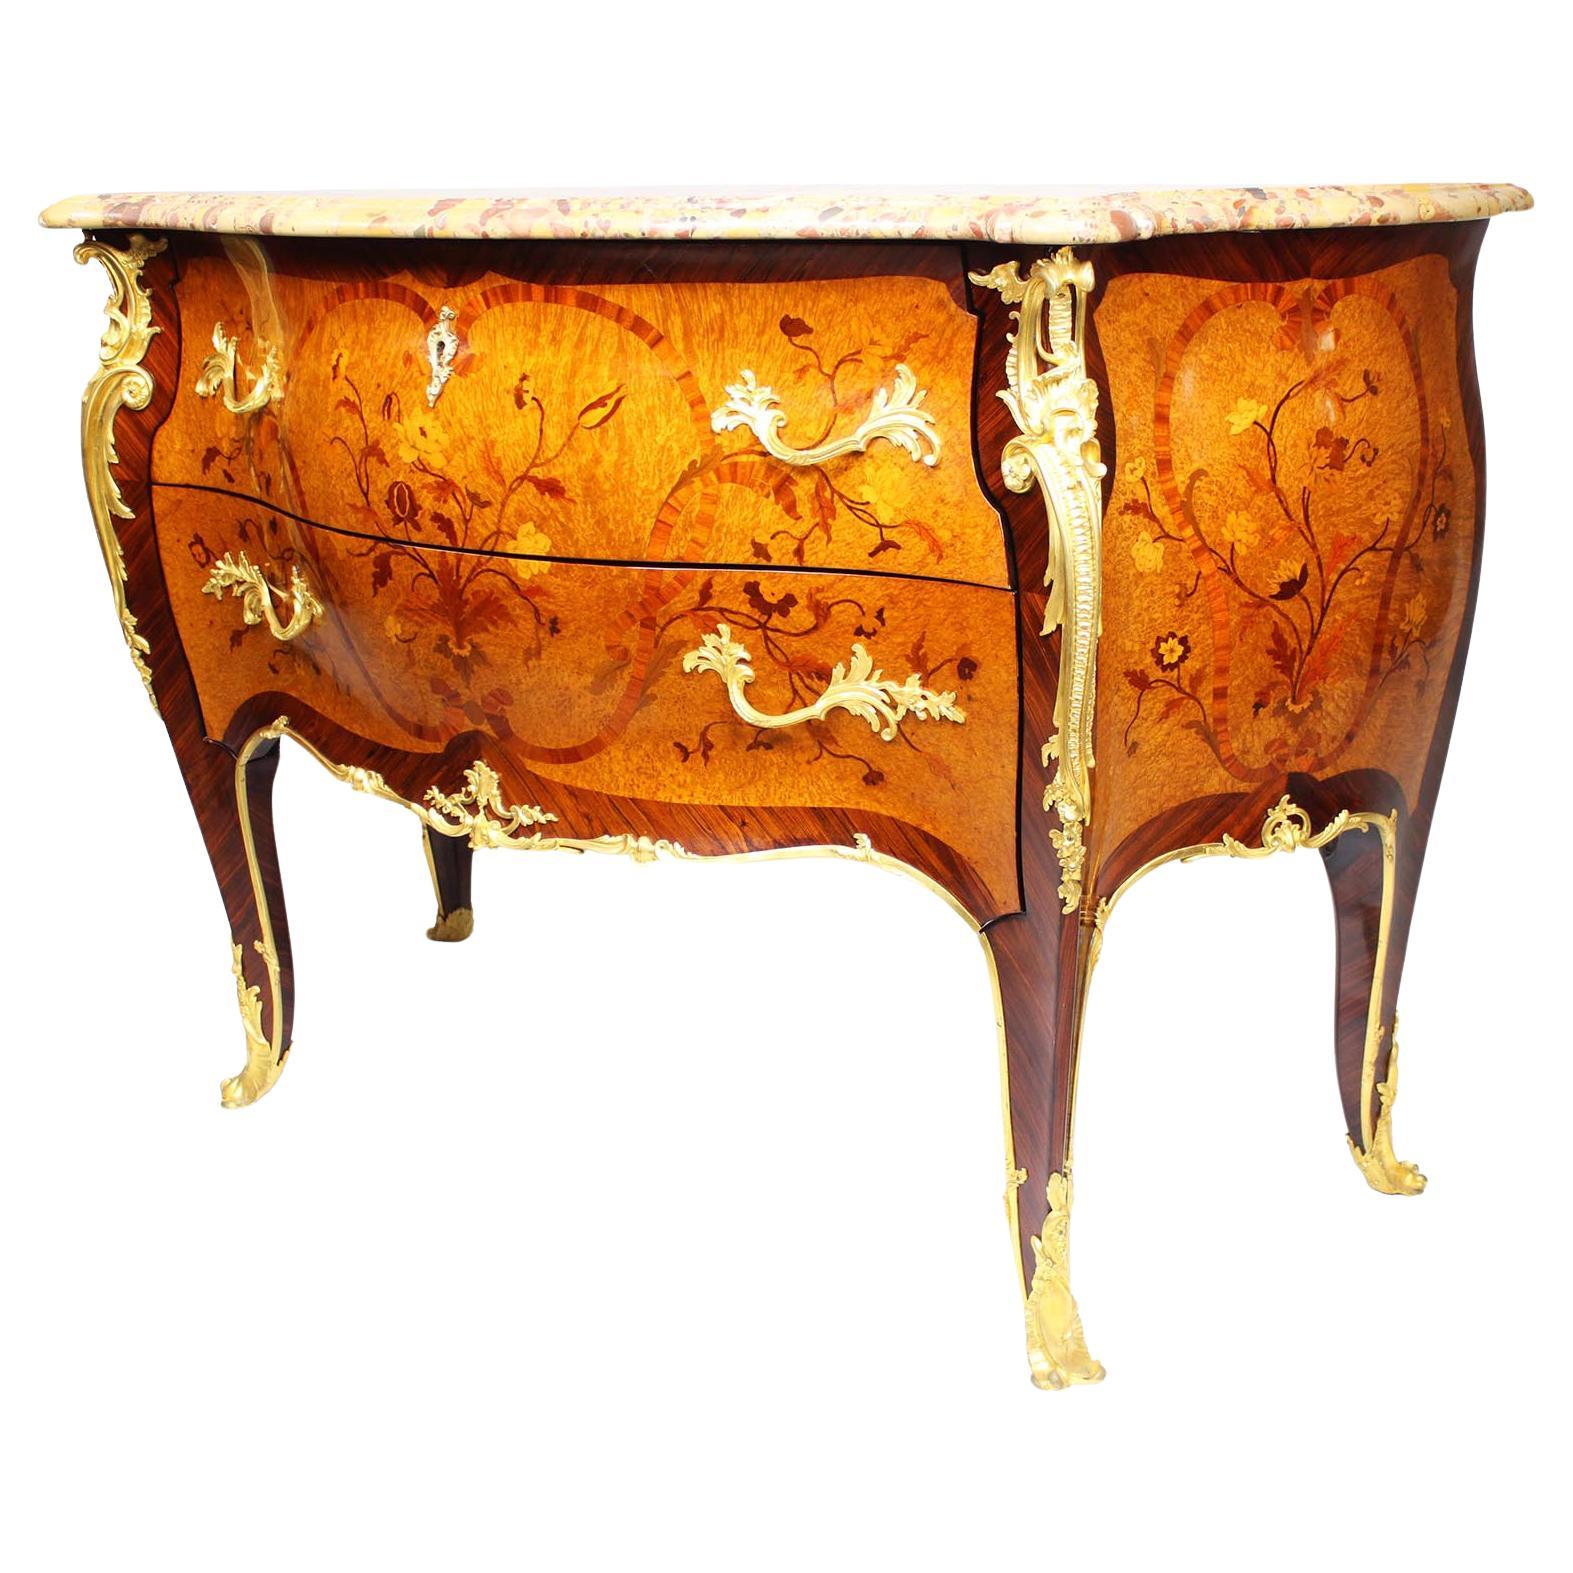 Fine French Louis XV Style Ormolu-Mounted Bombe Commode Attr. to François Linke